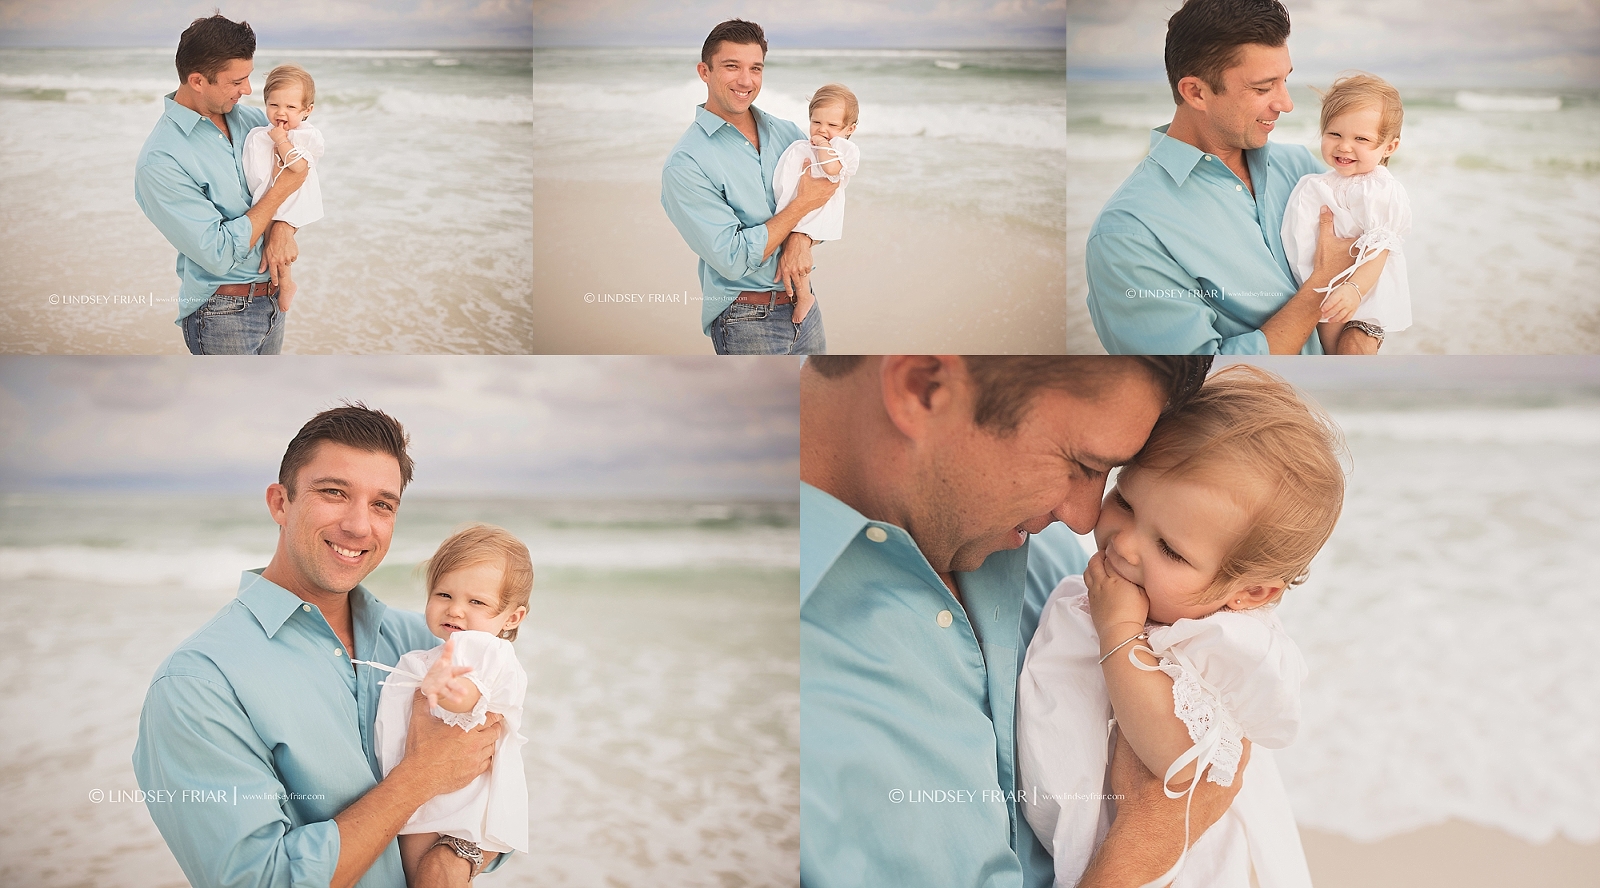 Daddy and Daughter bond on Pesnacola Beach